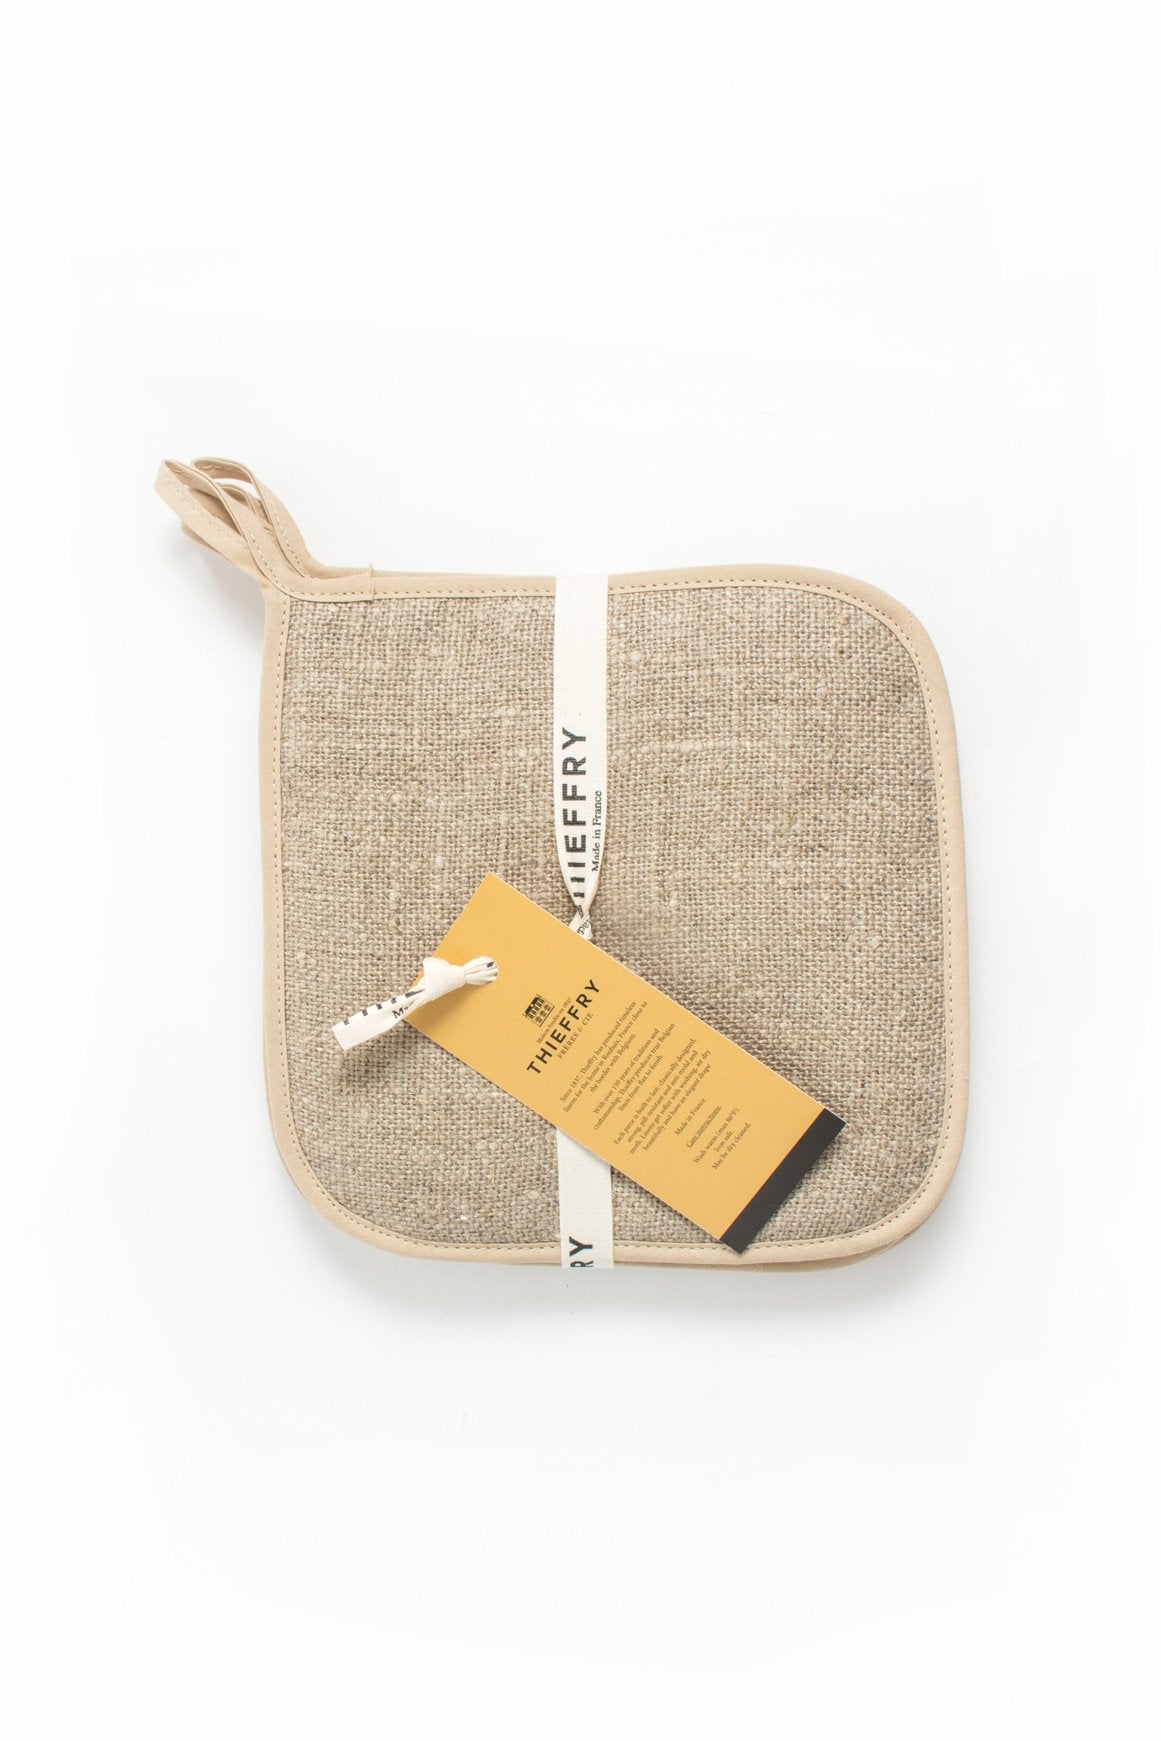 Thieffry Bagatelle Linen Pot Holder - French Dry Goods